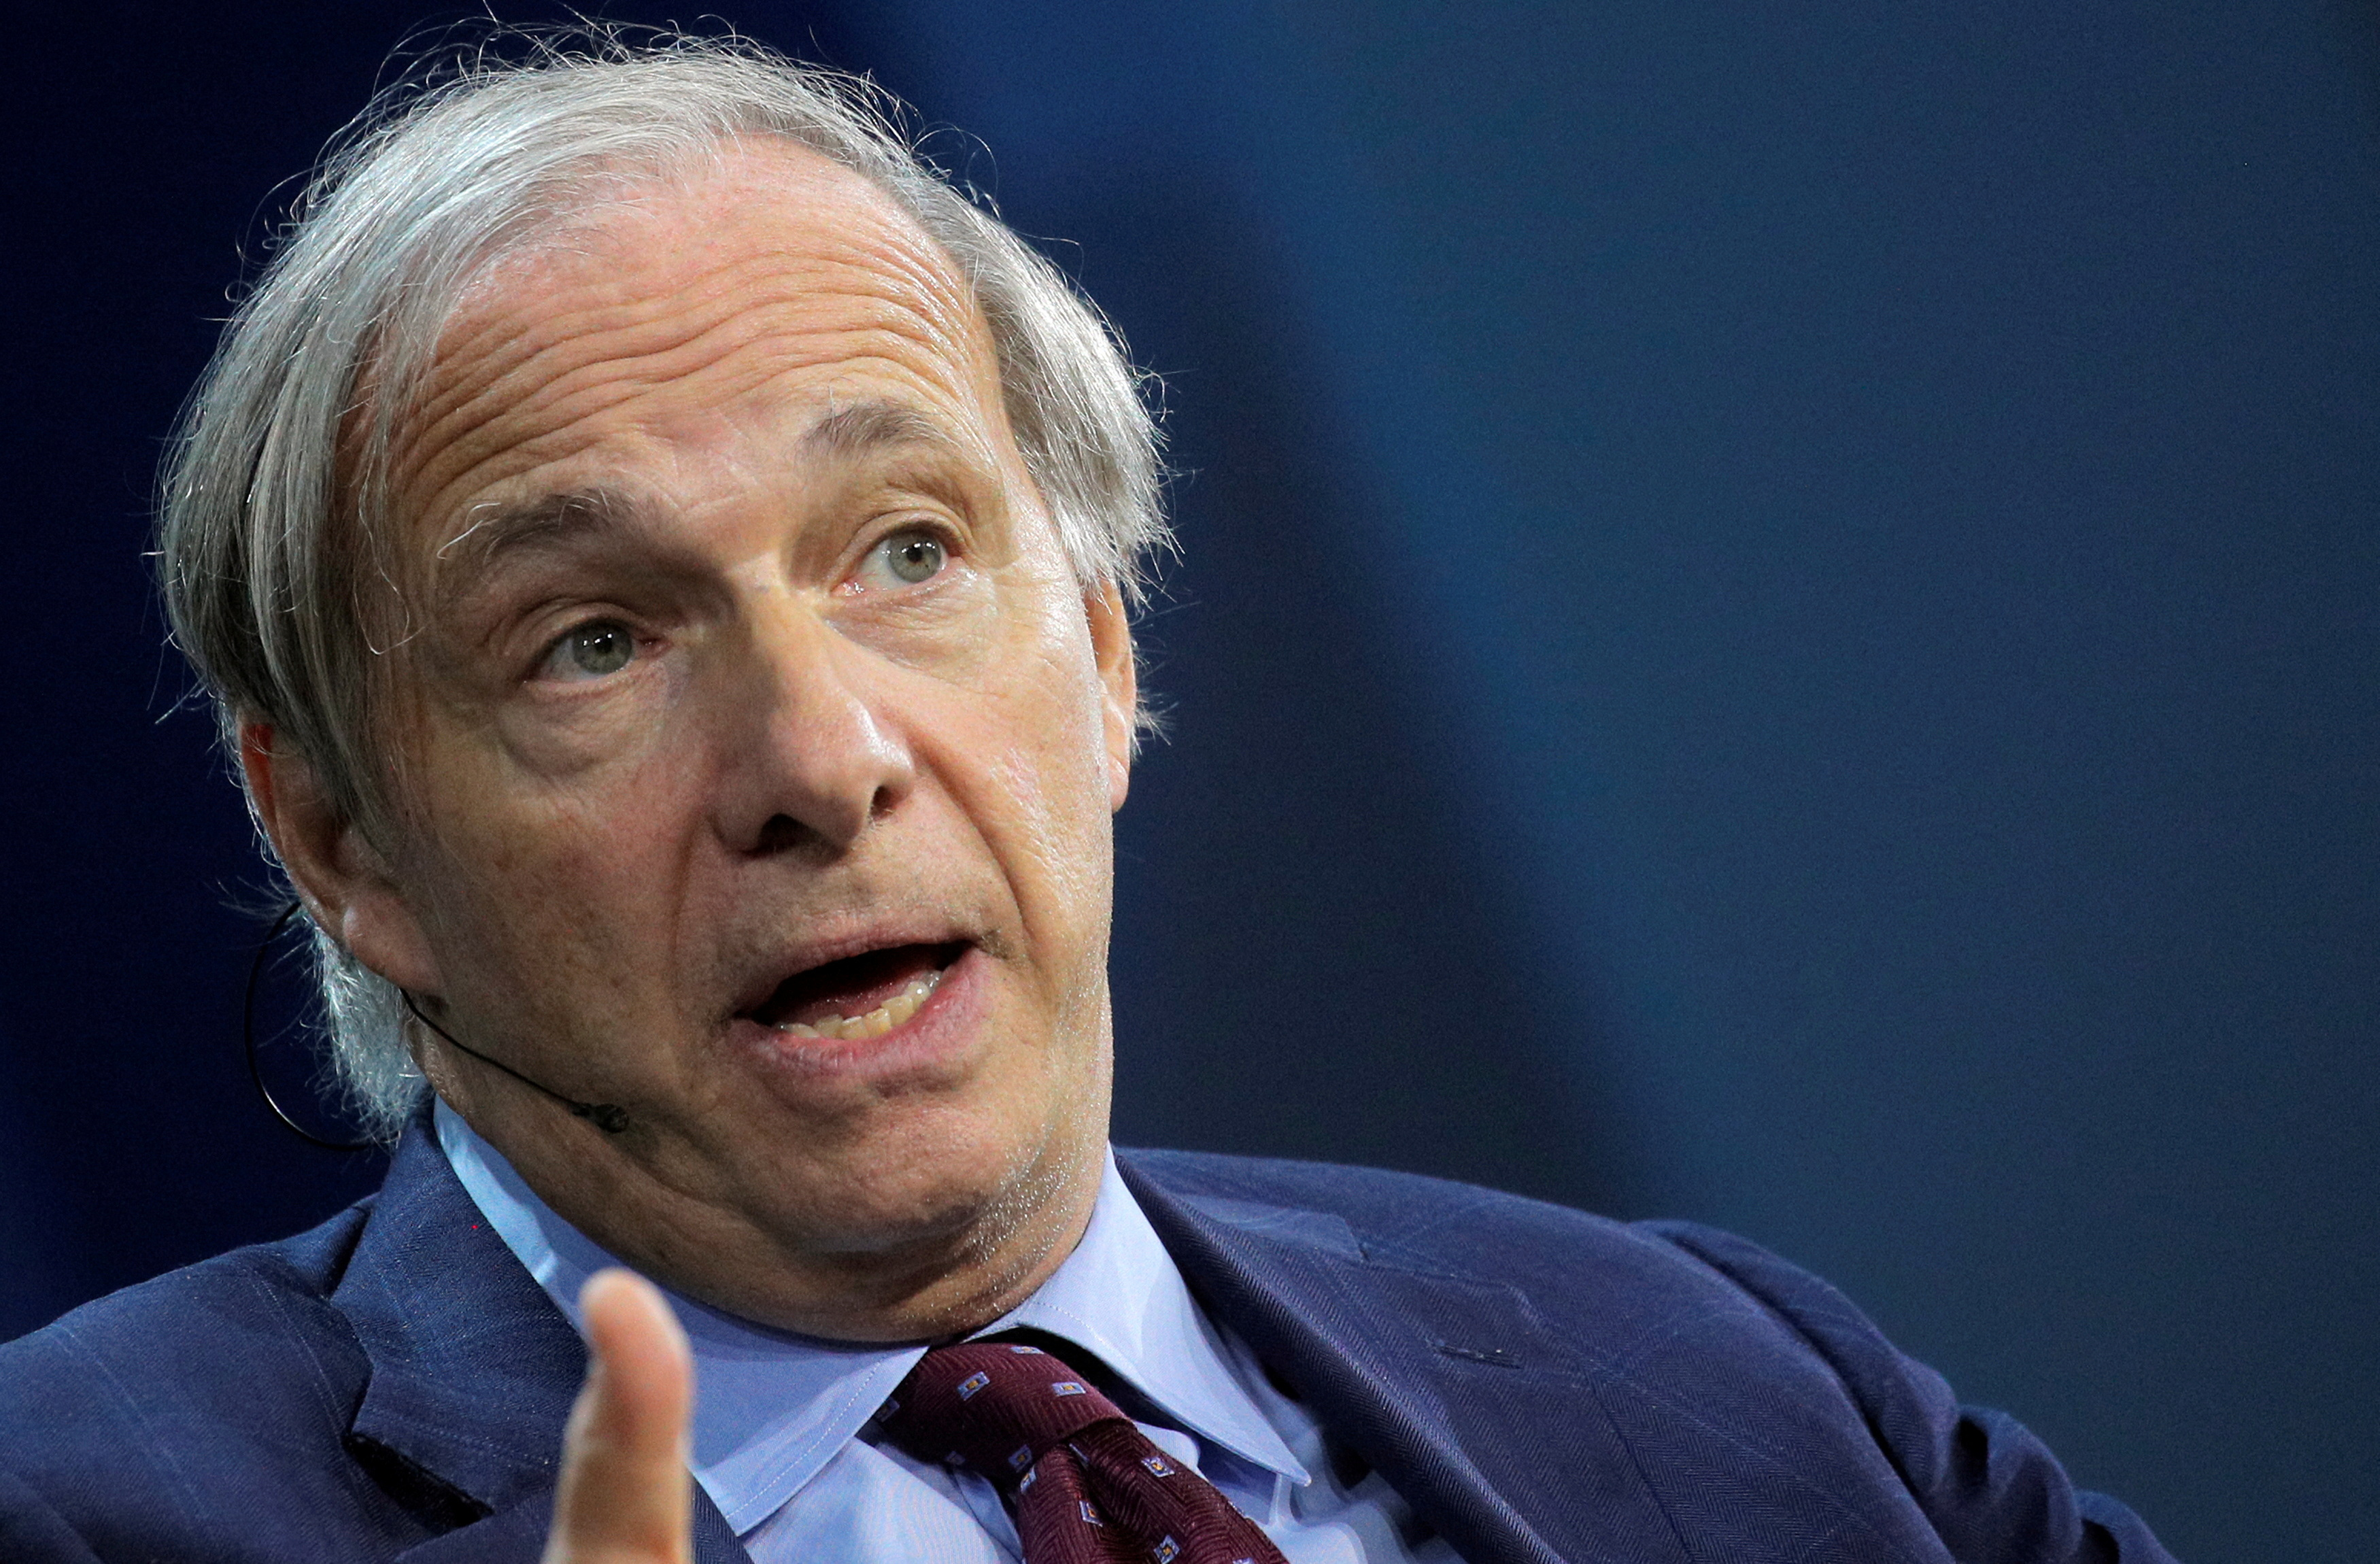 Ray Dalio, Bridgewater's Co-Chairman and Co-Chief Investment Officer speaks during the Skybridge Capital SALT New York 2021 conference in New York